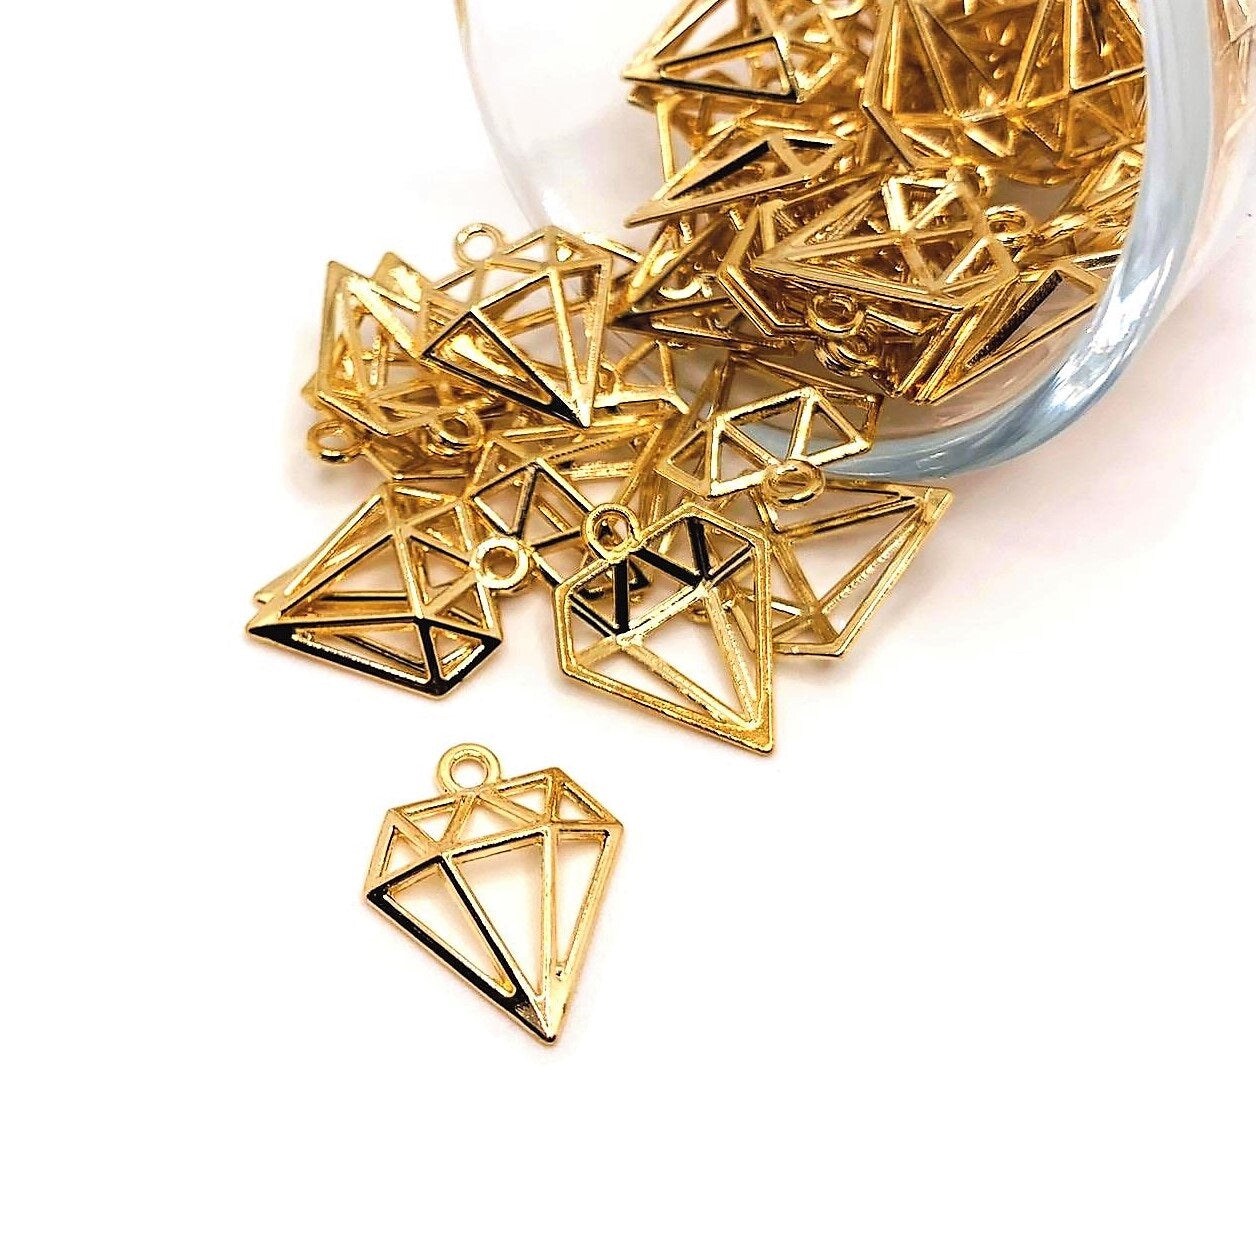 4, 20 or 50 Pieces: Gold Diamond Shape Charms